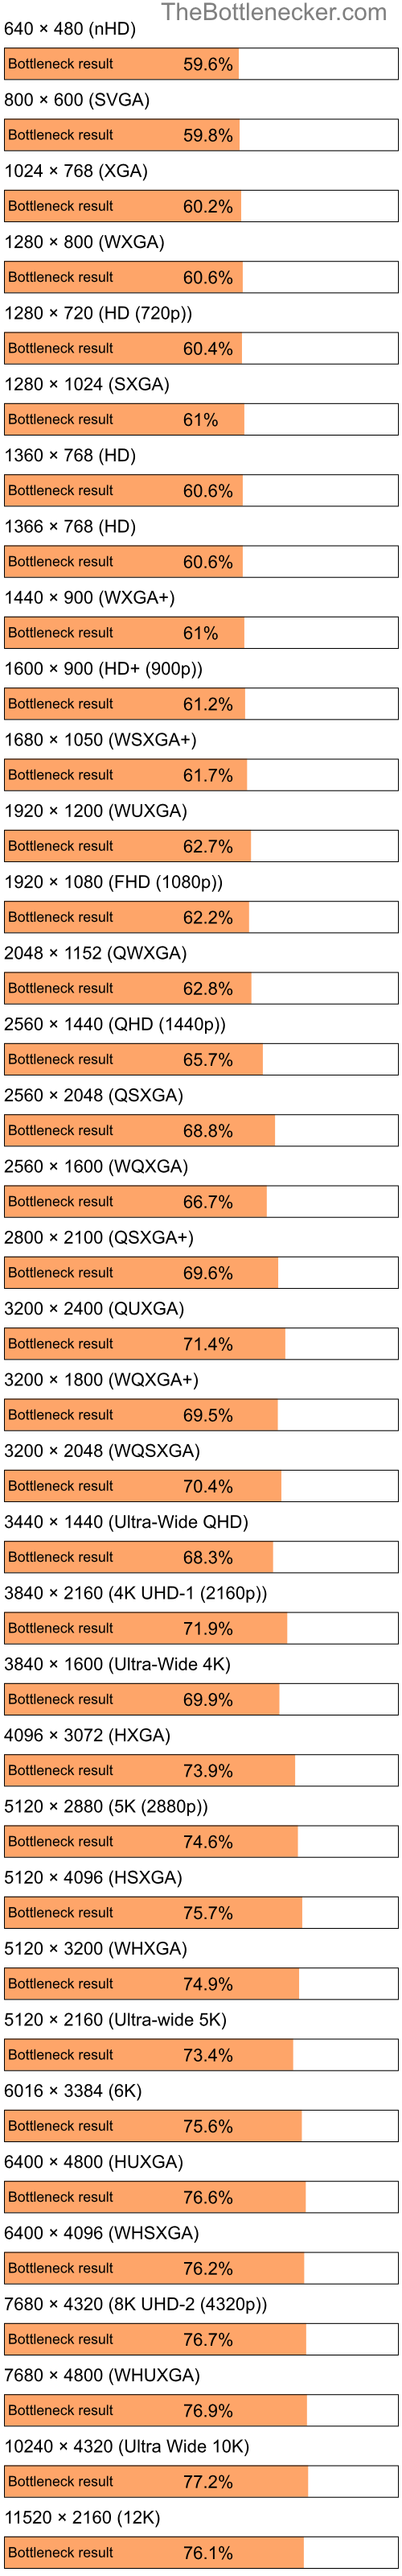 Bottleneck results by resolution for Intel Pentium 4 and NVIDIA nForce 720a in Processor Intense Tasks